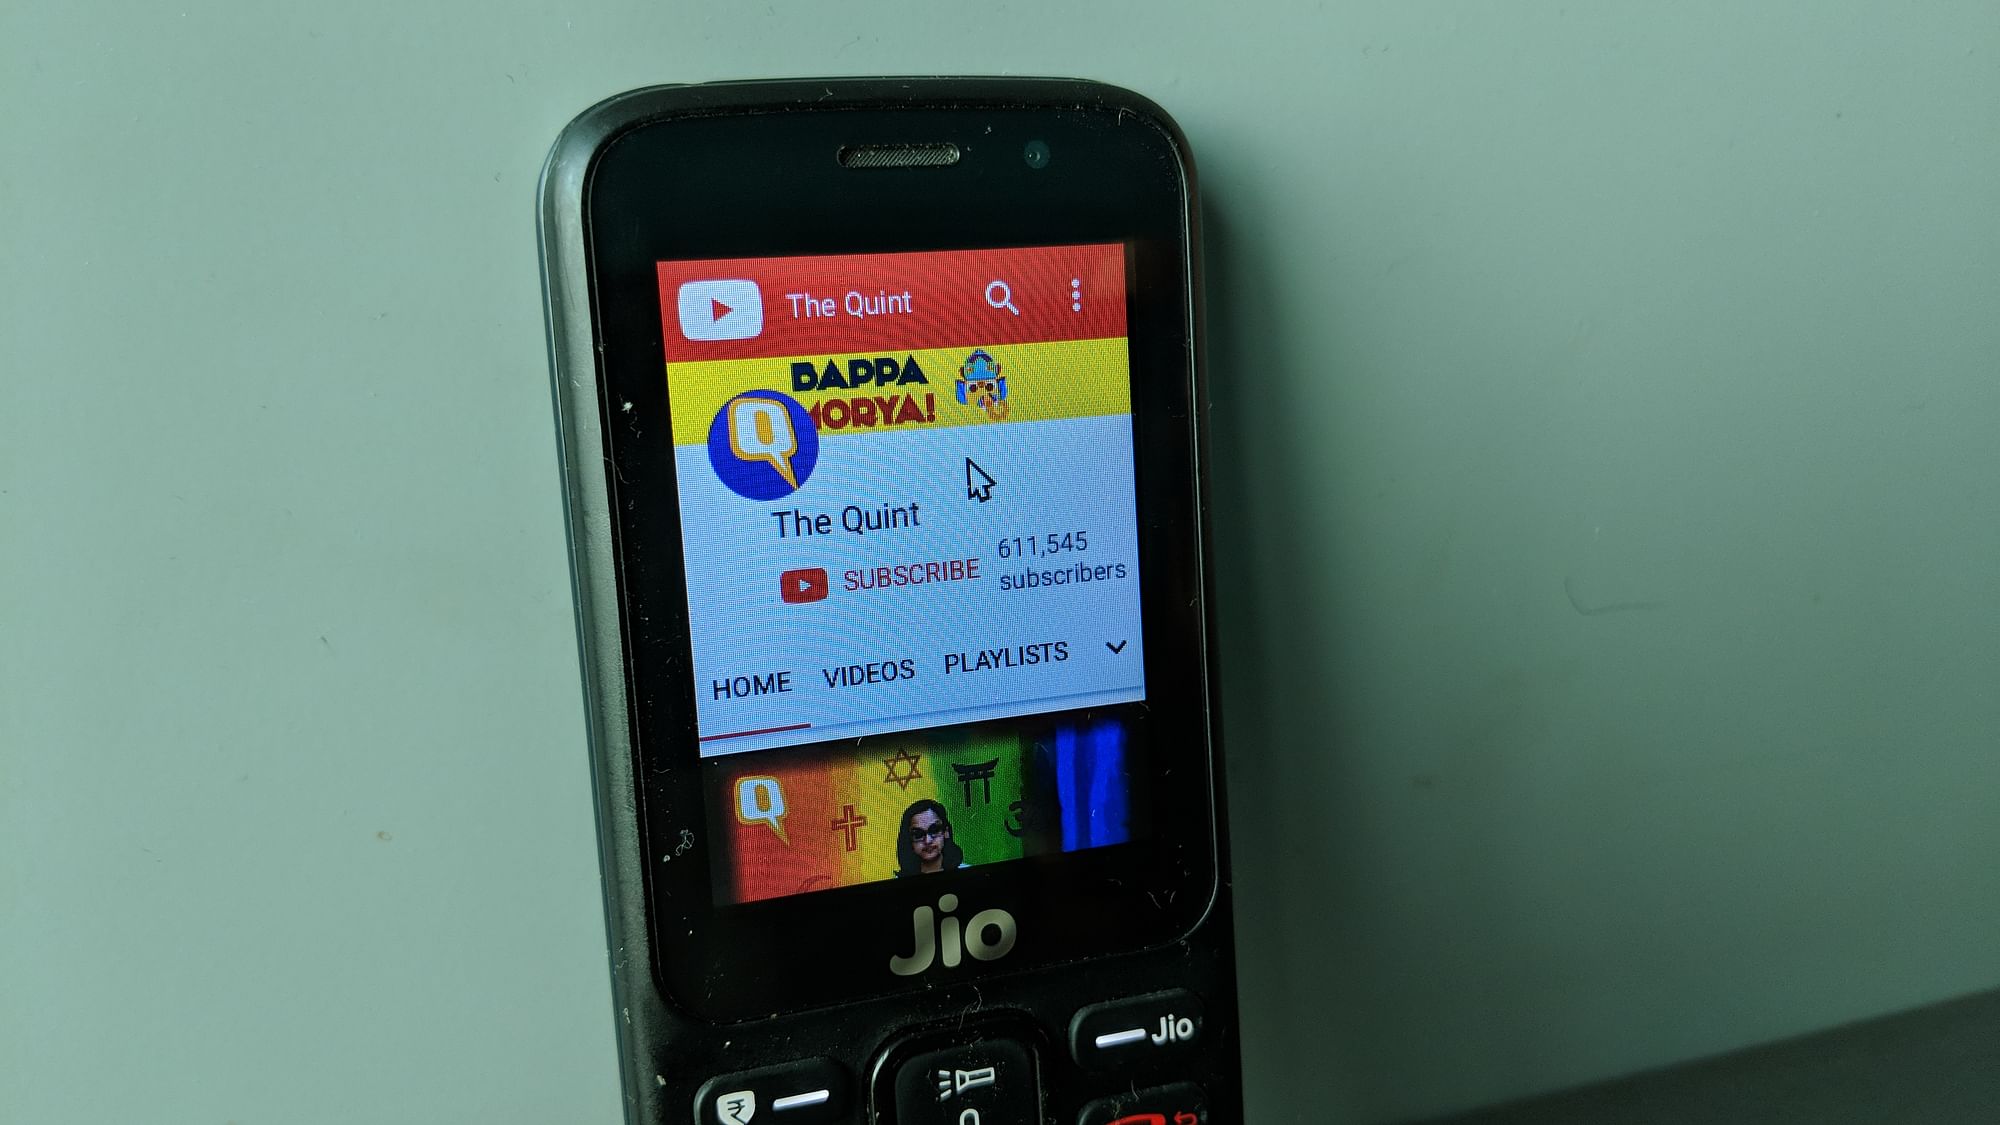 YouTube in 2018 has made its way to entry-level devices like JioPhone in India.